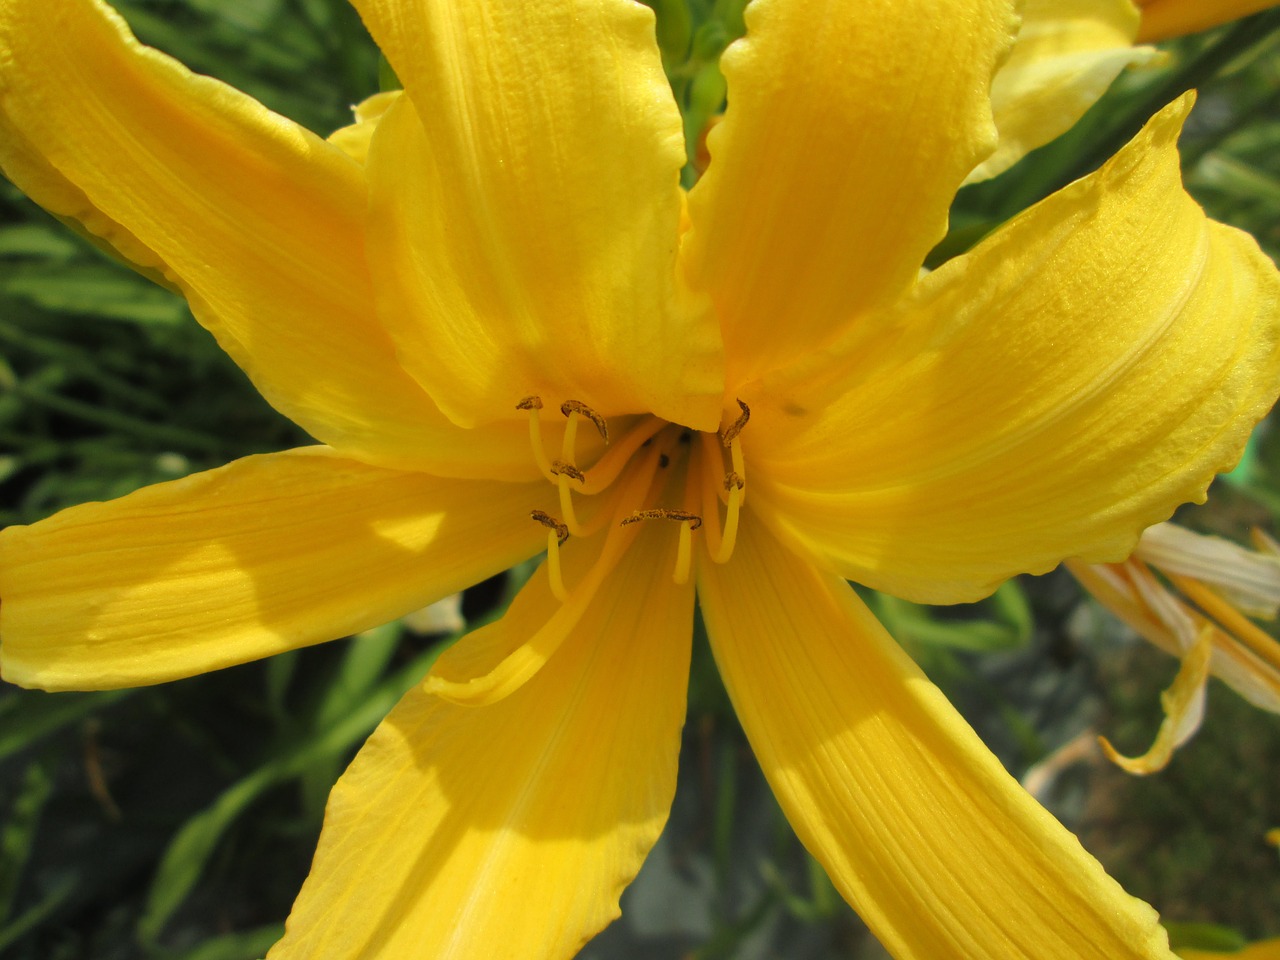 day lilies flowers garden free photo